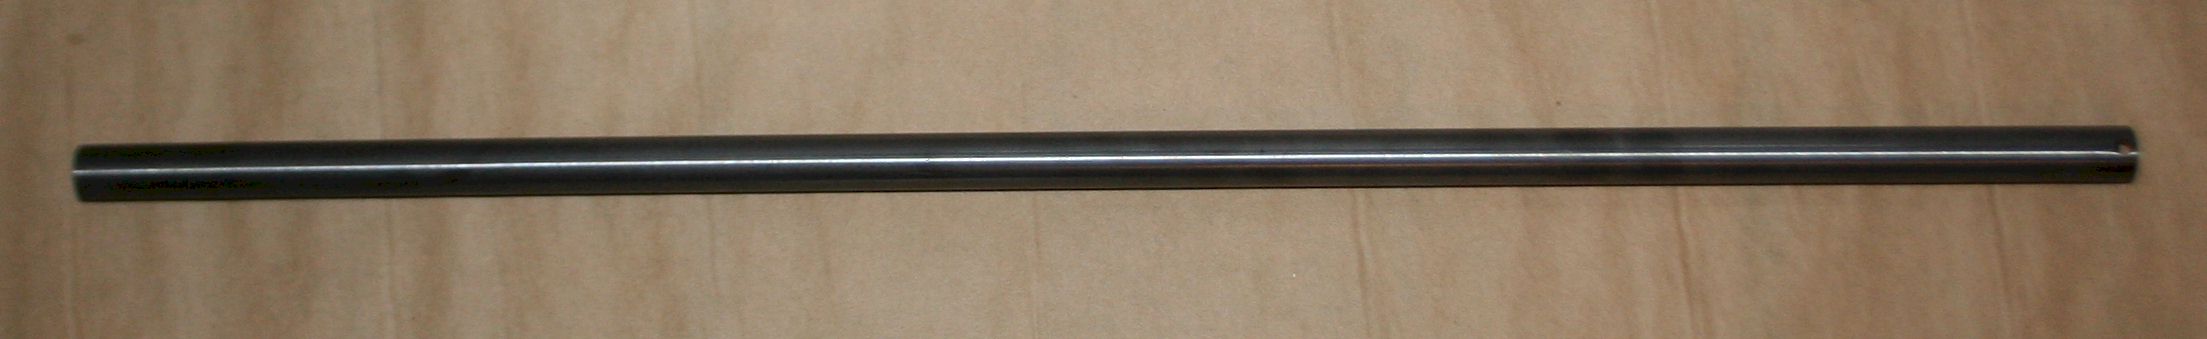 Magazine tube EXTRA LONG 30 inch LARGE cal 30/30, .38, .44 cal Winchester 1866 1873, 1892, 1894, 64, 53 and Marlin - Click Image to Close